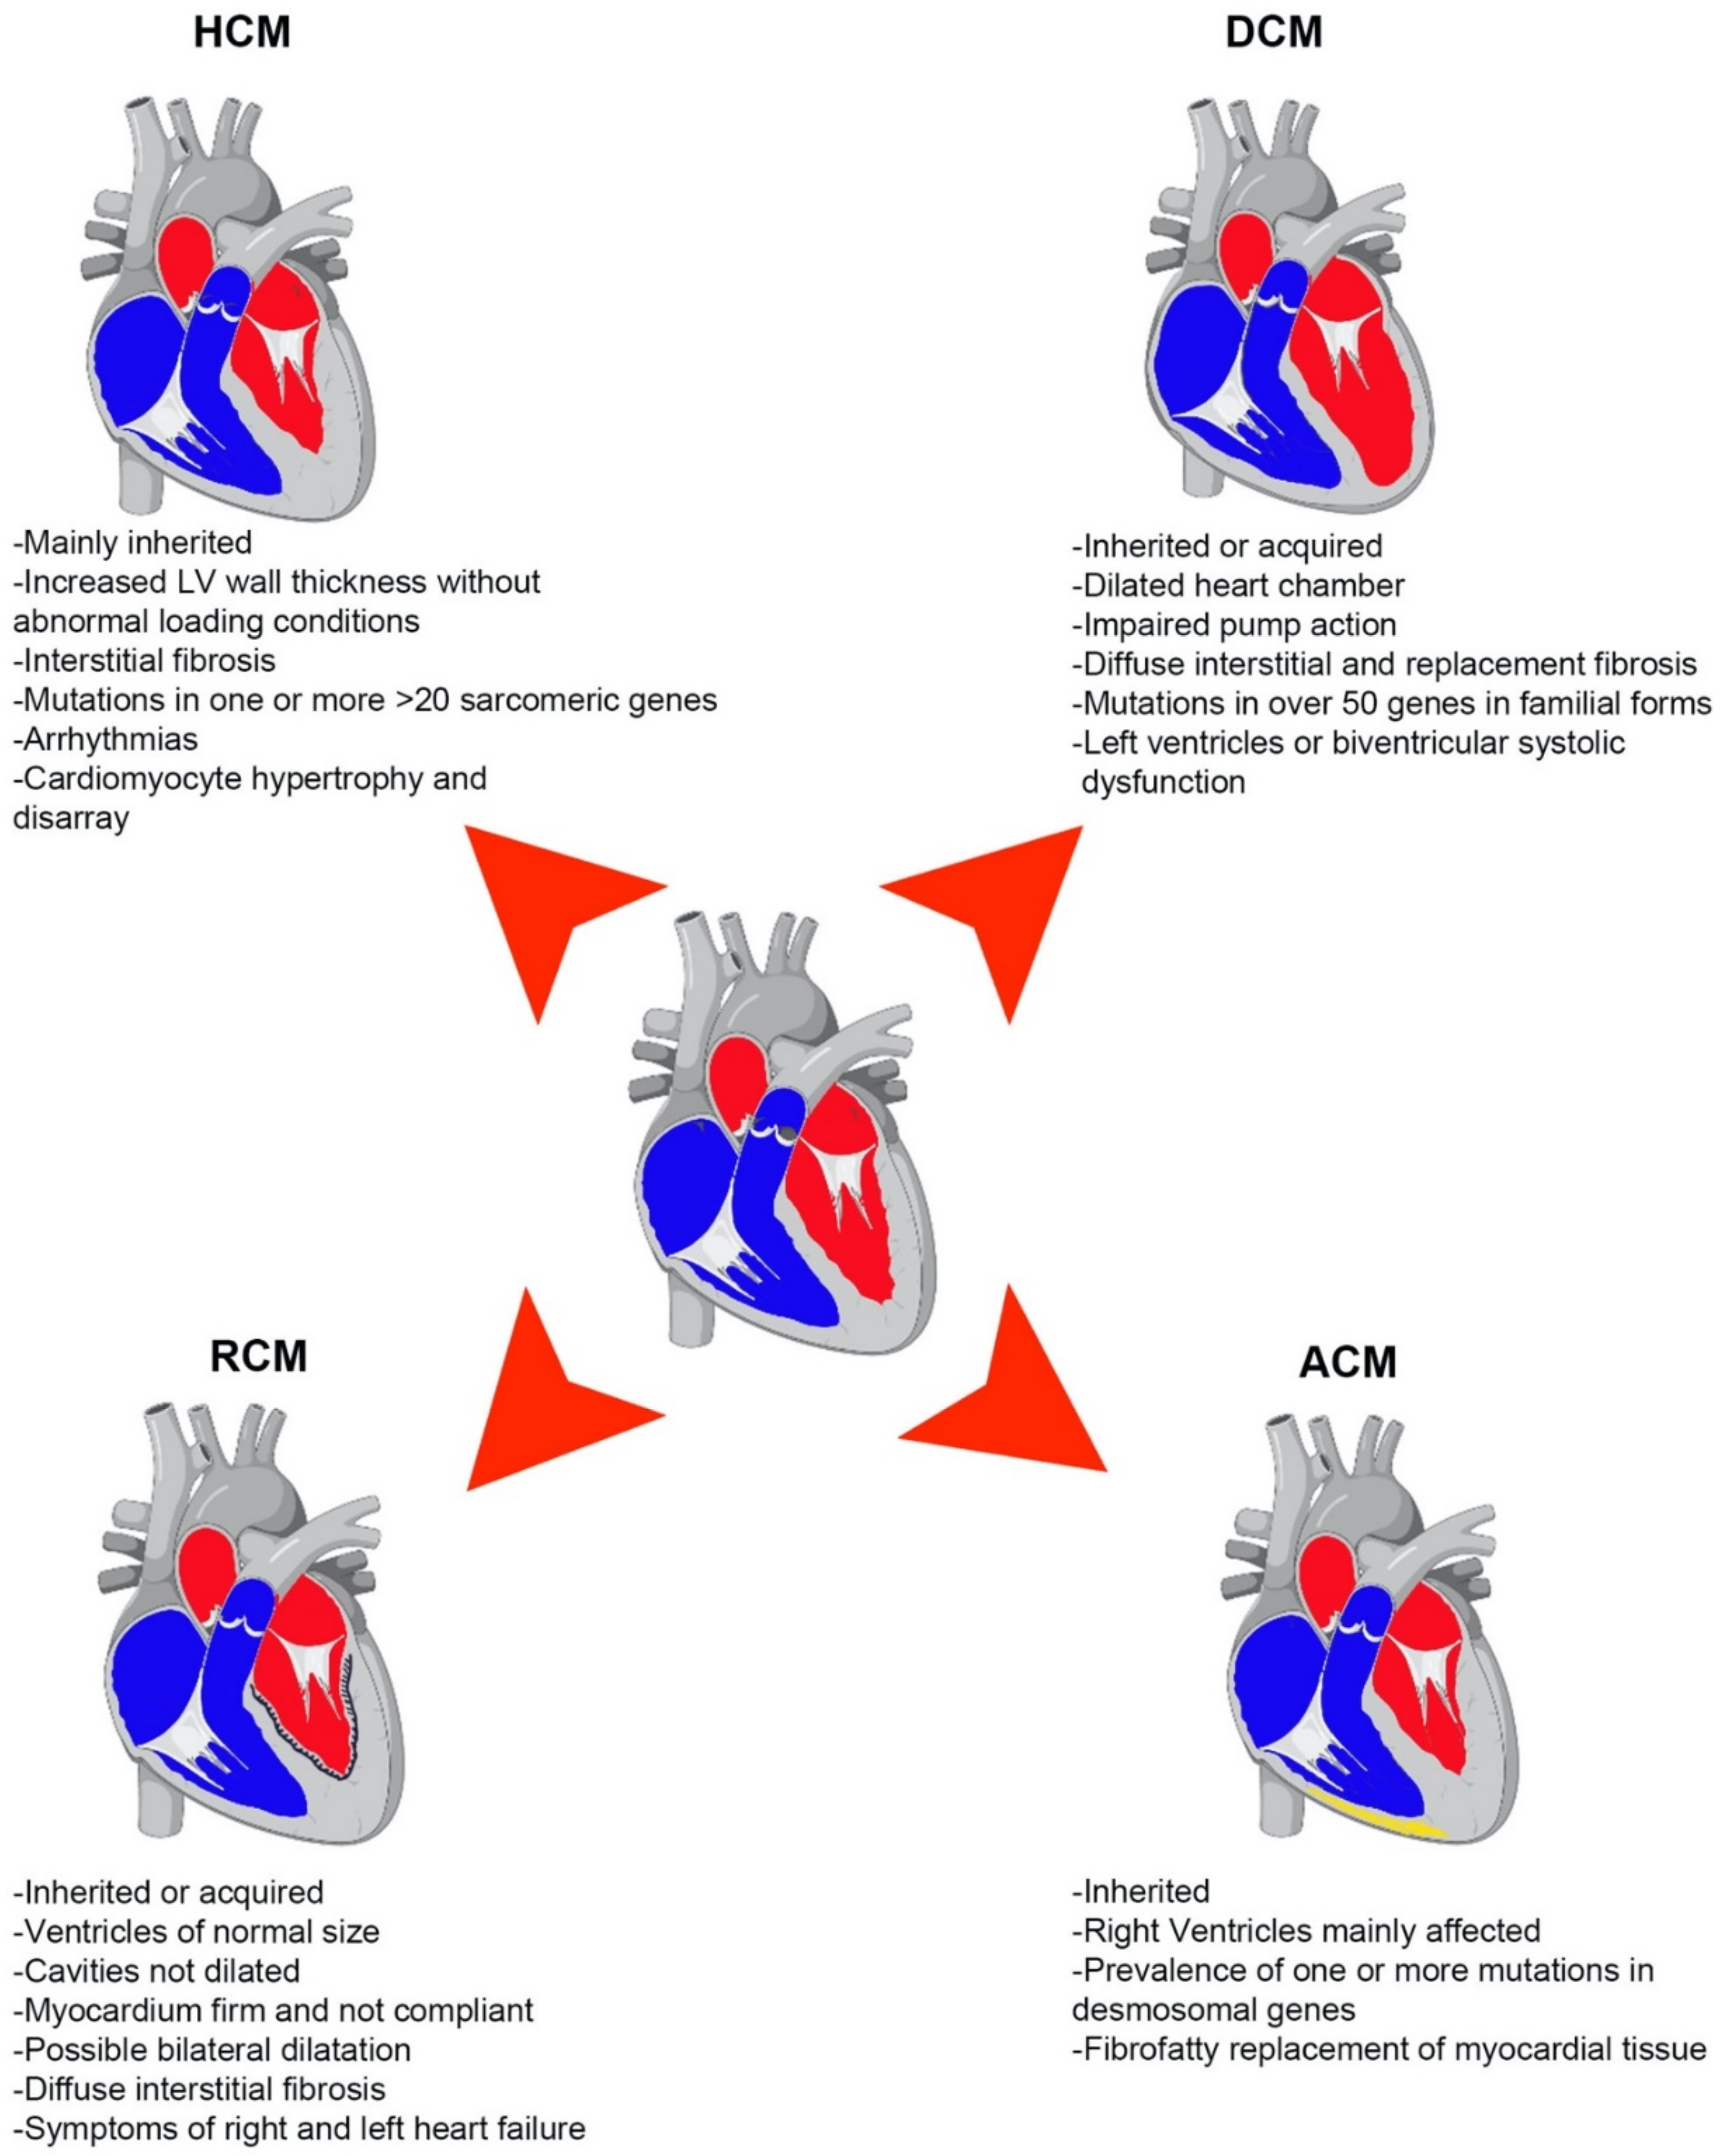 IJMS | Free Full-Text | The Emerging Role of Epigenetics in Therapeutic  Targeting of Cardiomyopathies | HTML